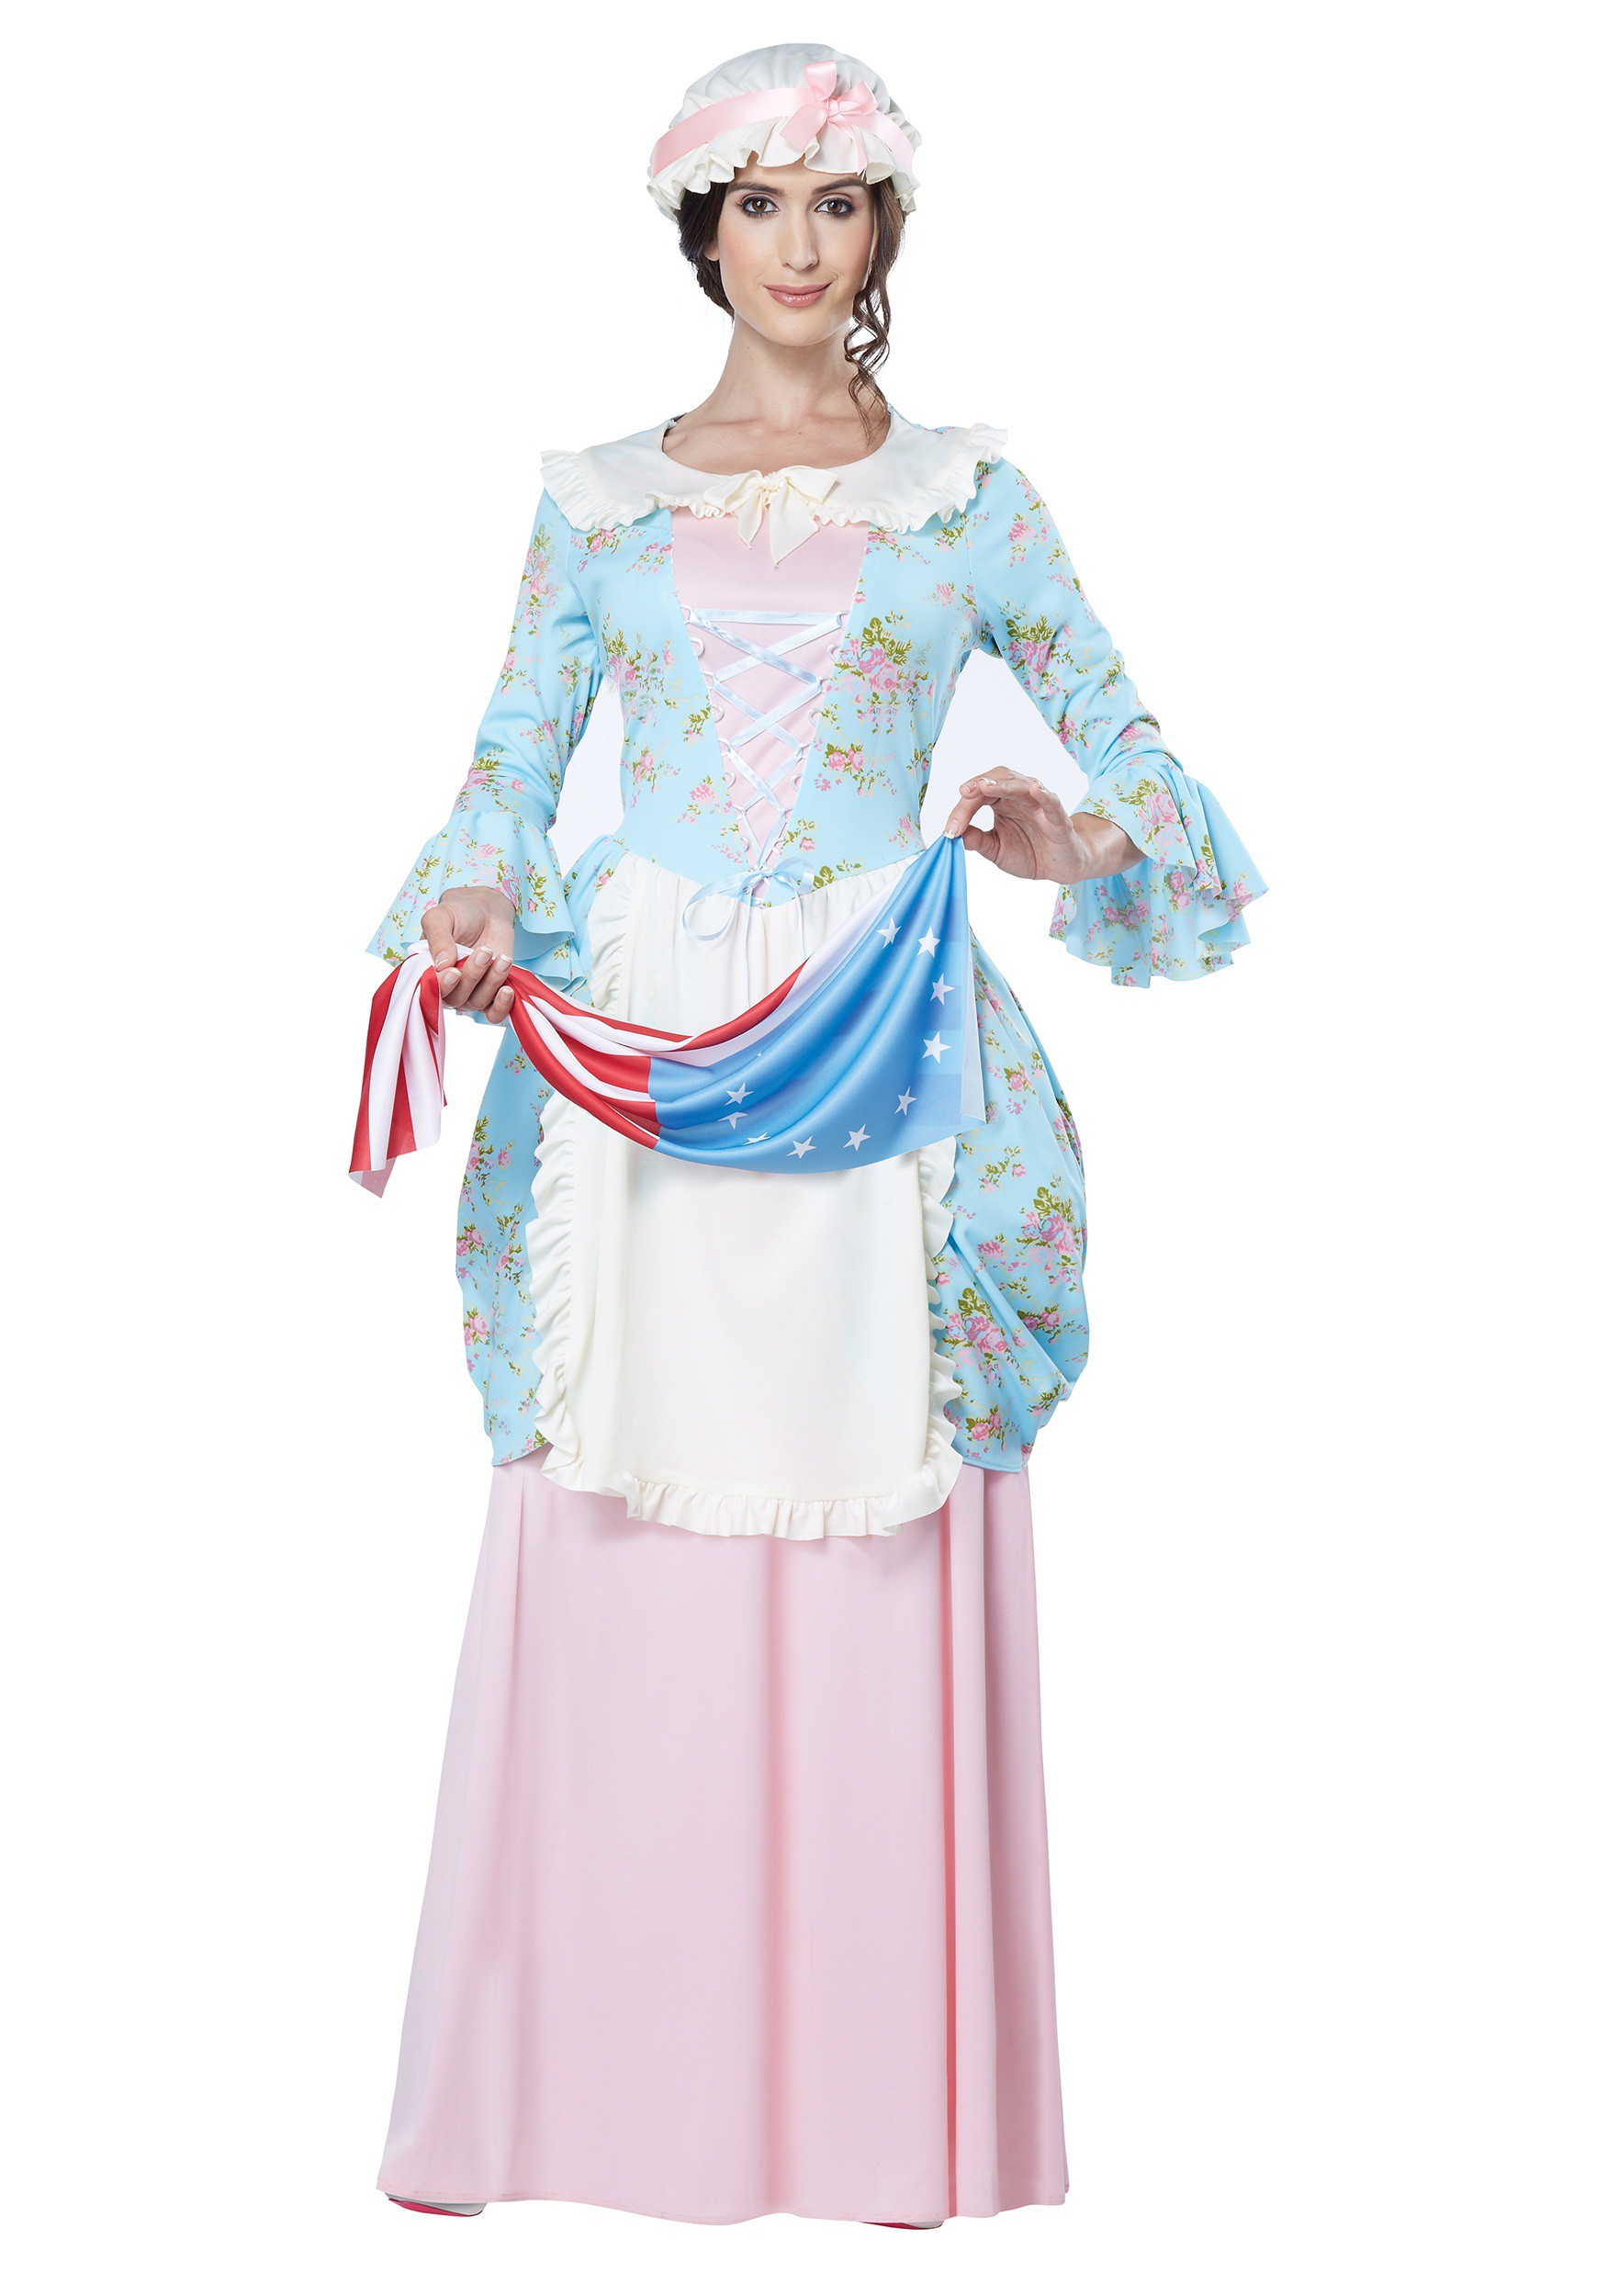 Photos - Fancy Dress California Costume Collection Women's Colonial Lady Costume | Historical C 